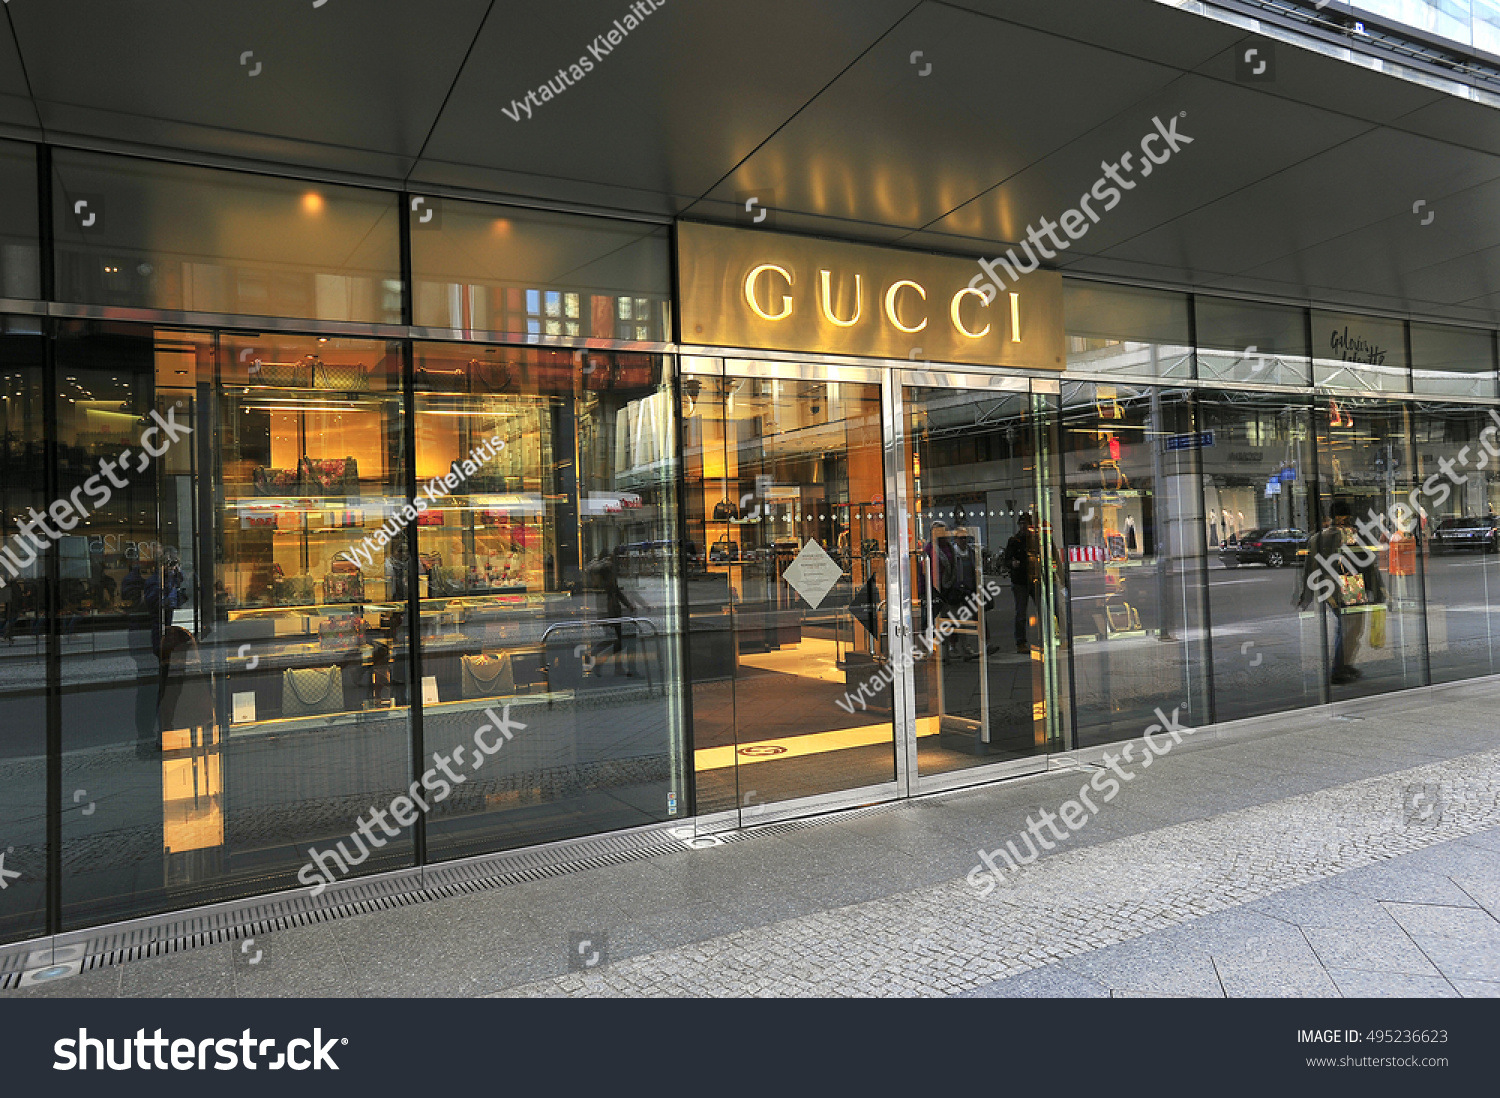 Berlingermanyapril 28 Gucci Fashion Store On Now) 495236623